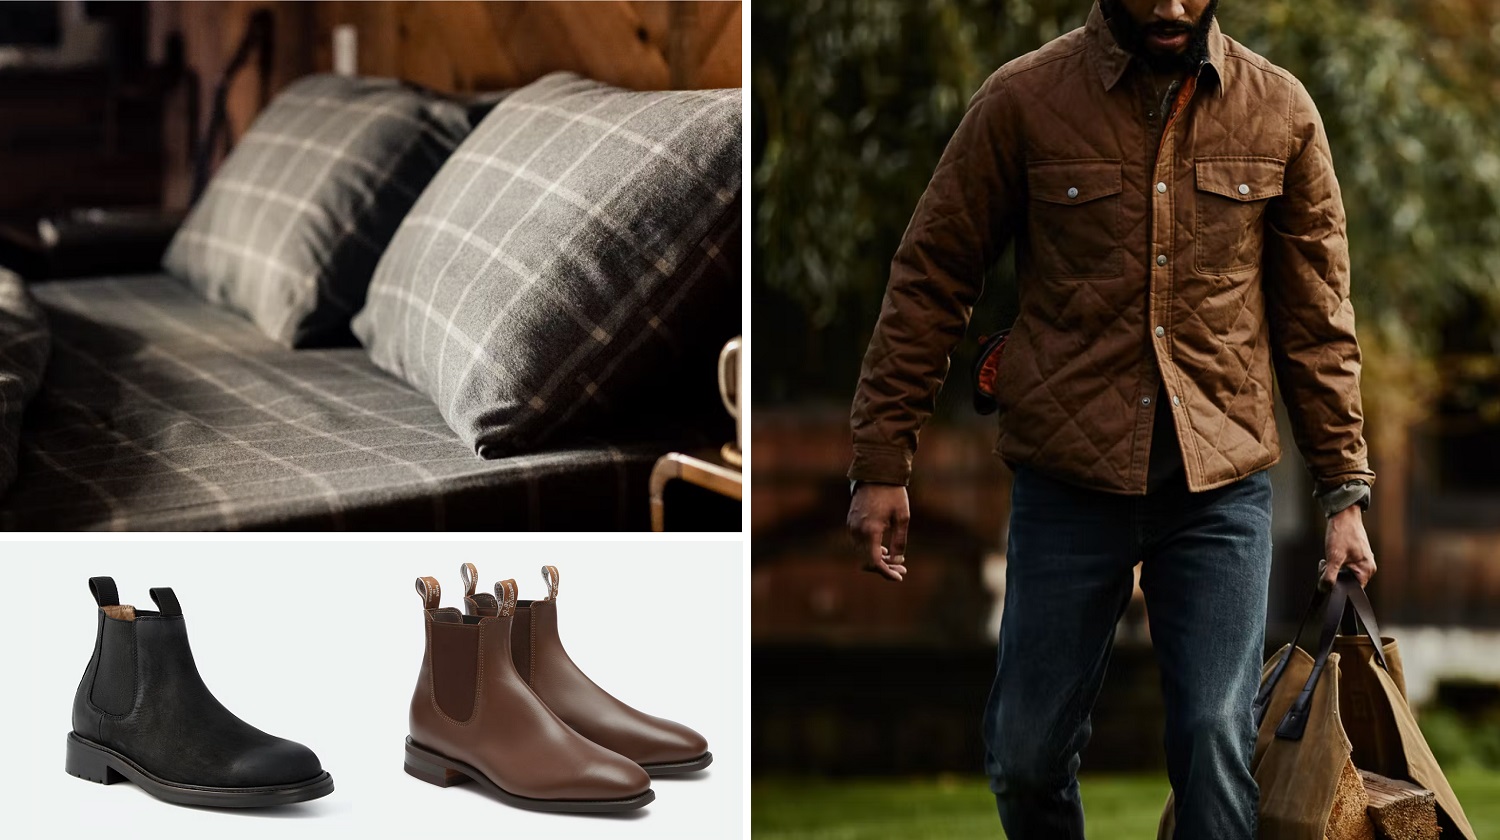 R.M.Williams Sale: Get 20% Off The Brand's Legendary Boots At The